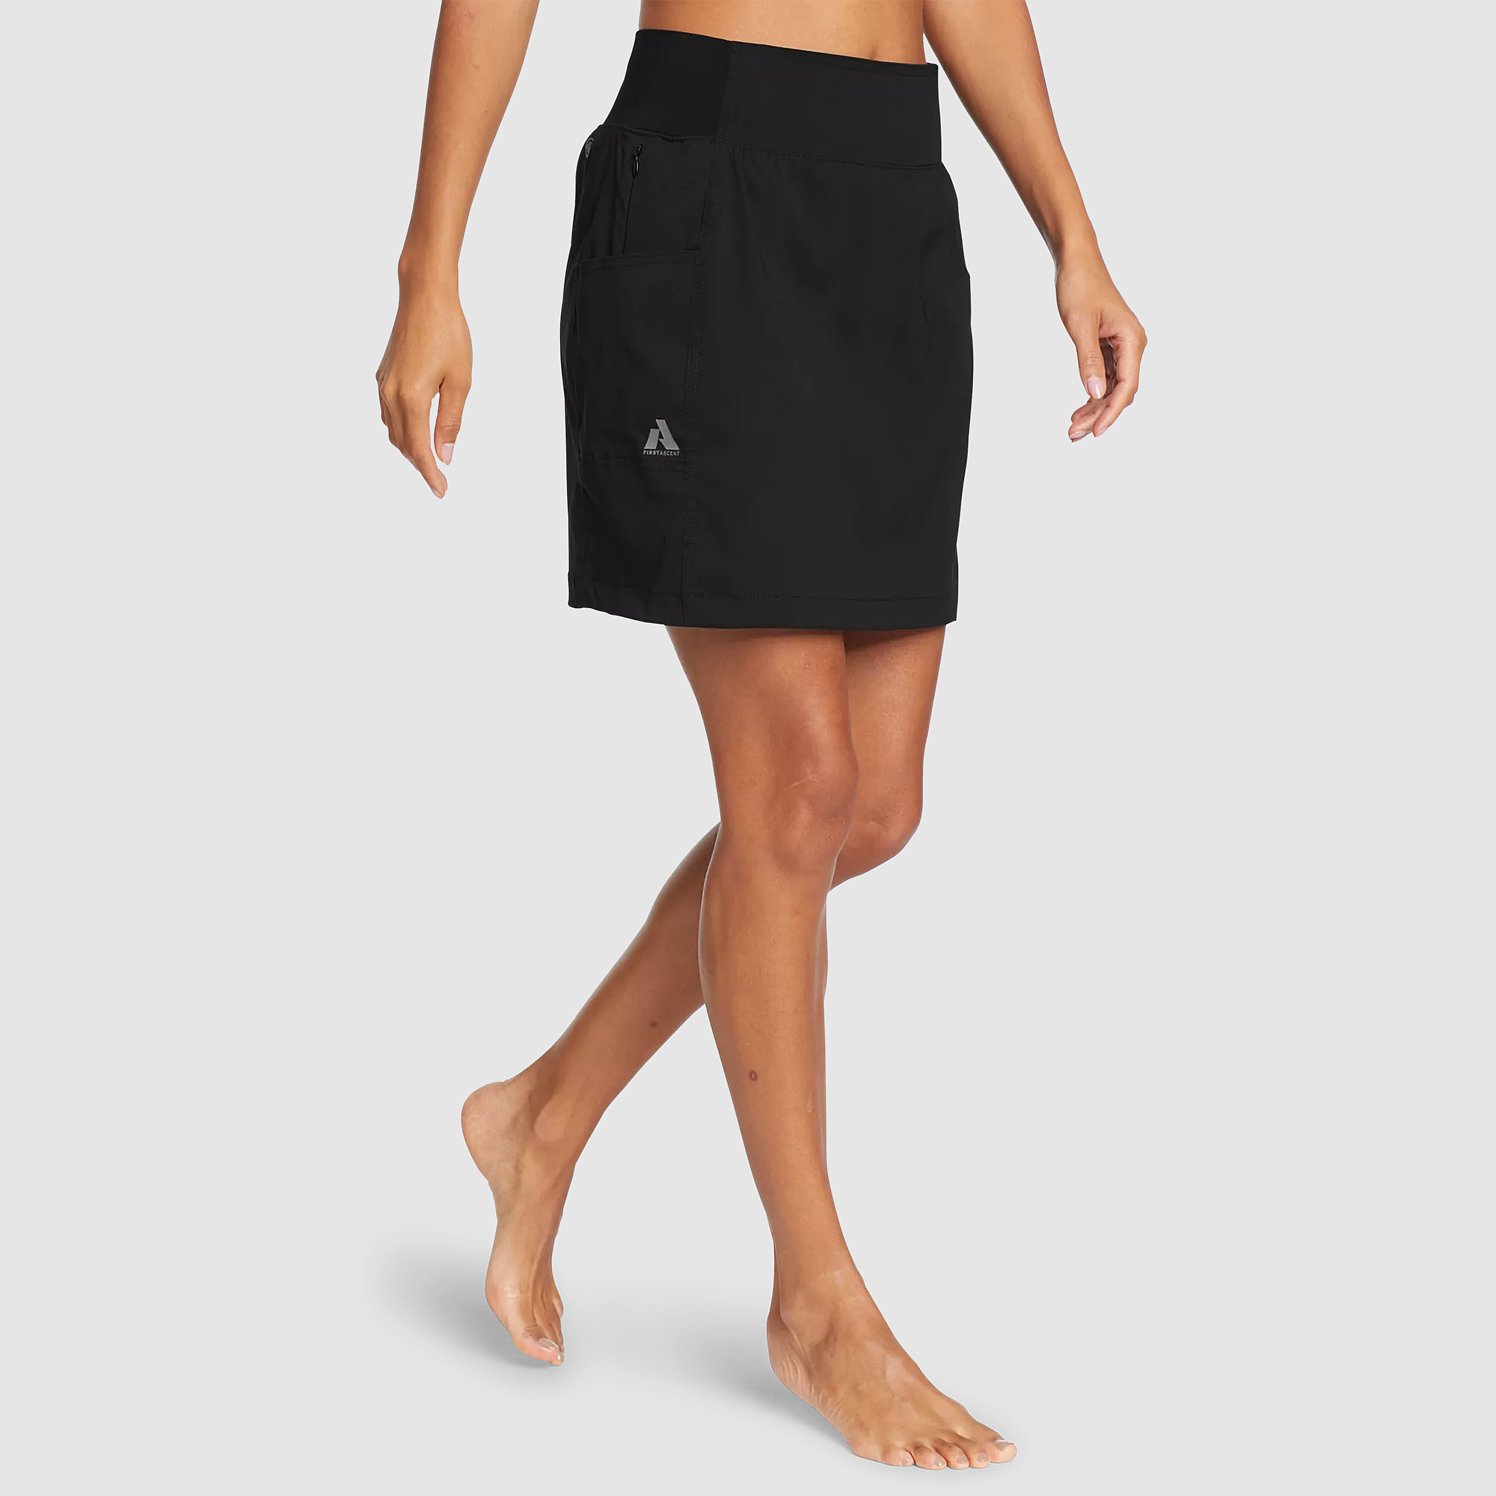 Avalanche Women's Quick Drying Woven Ripstop Skort with Bike Short